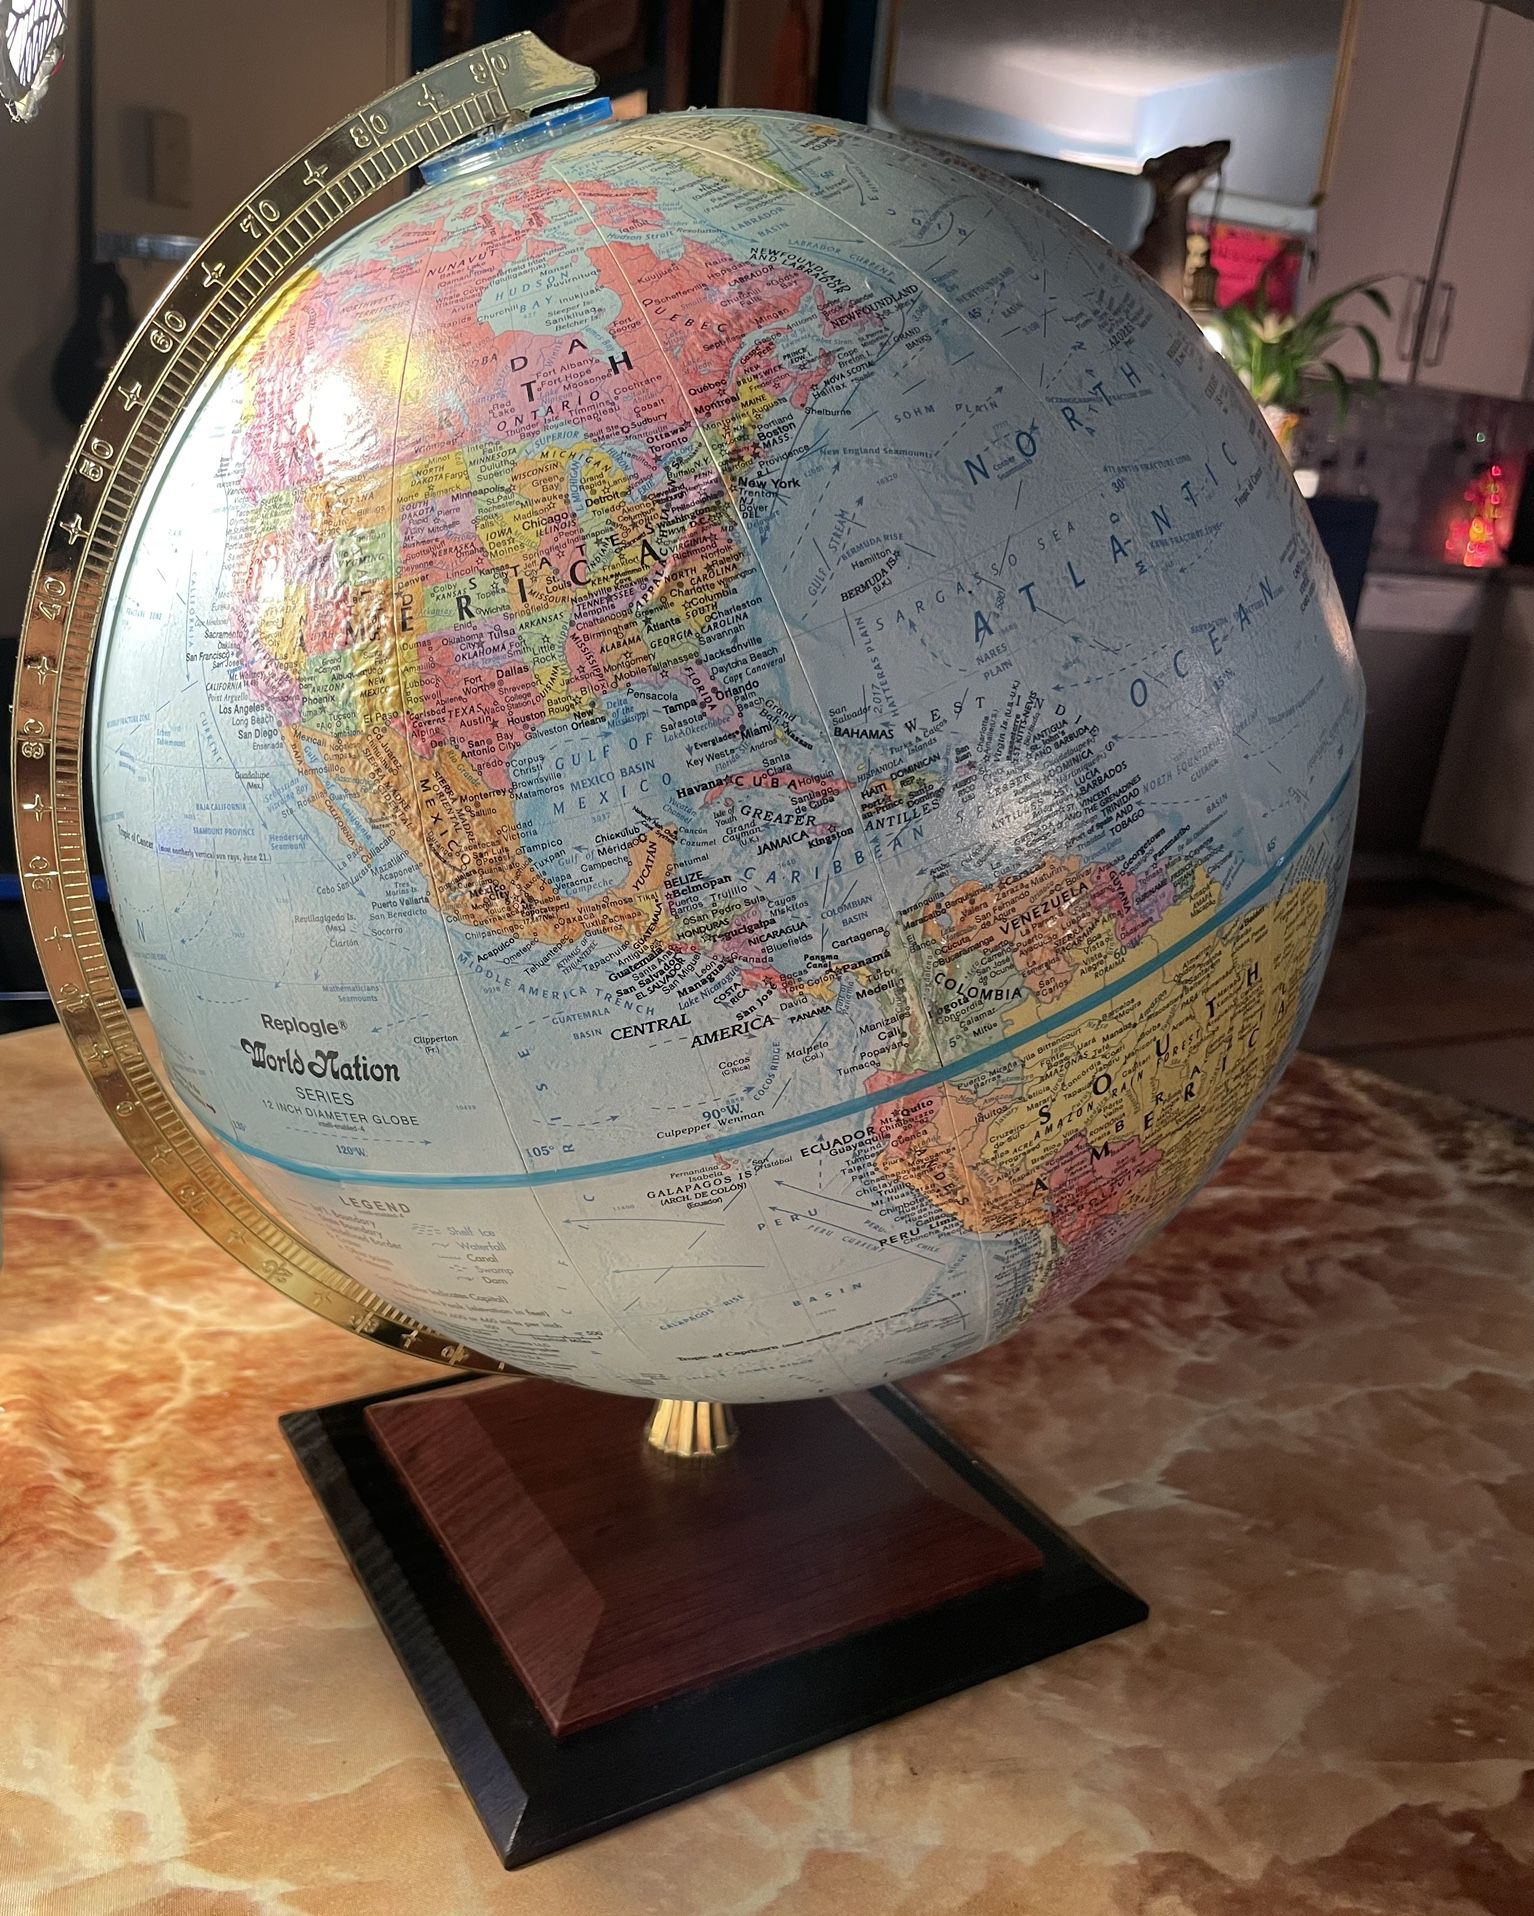 Beautiful 12-inch globe, raised relief, over 4,000 place names 🌎🌍🌏